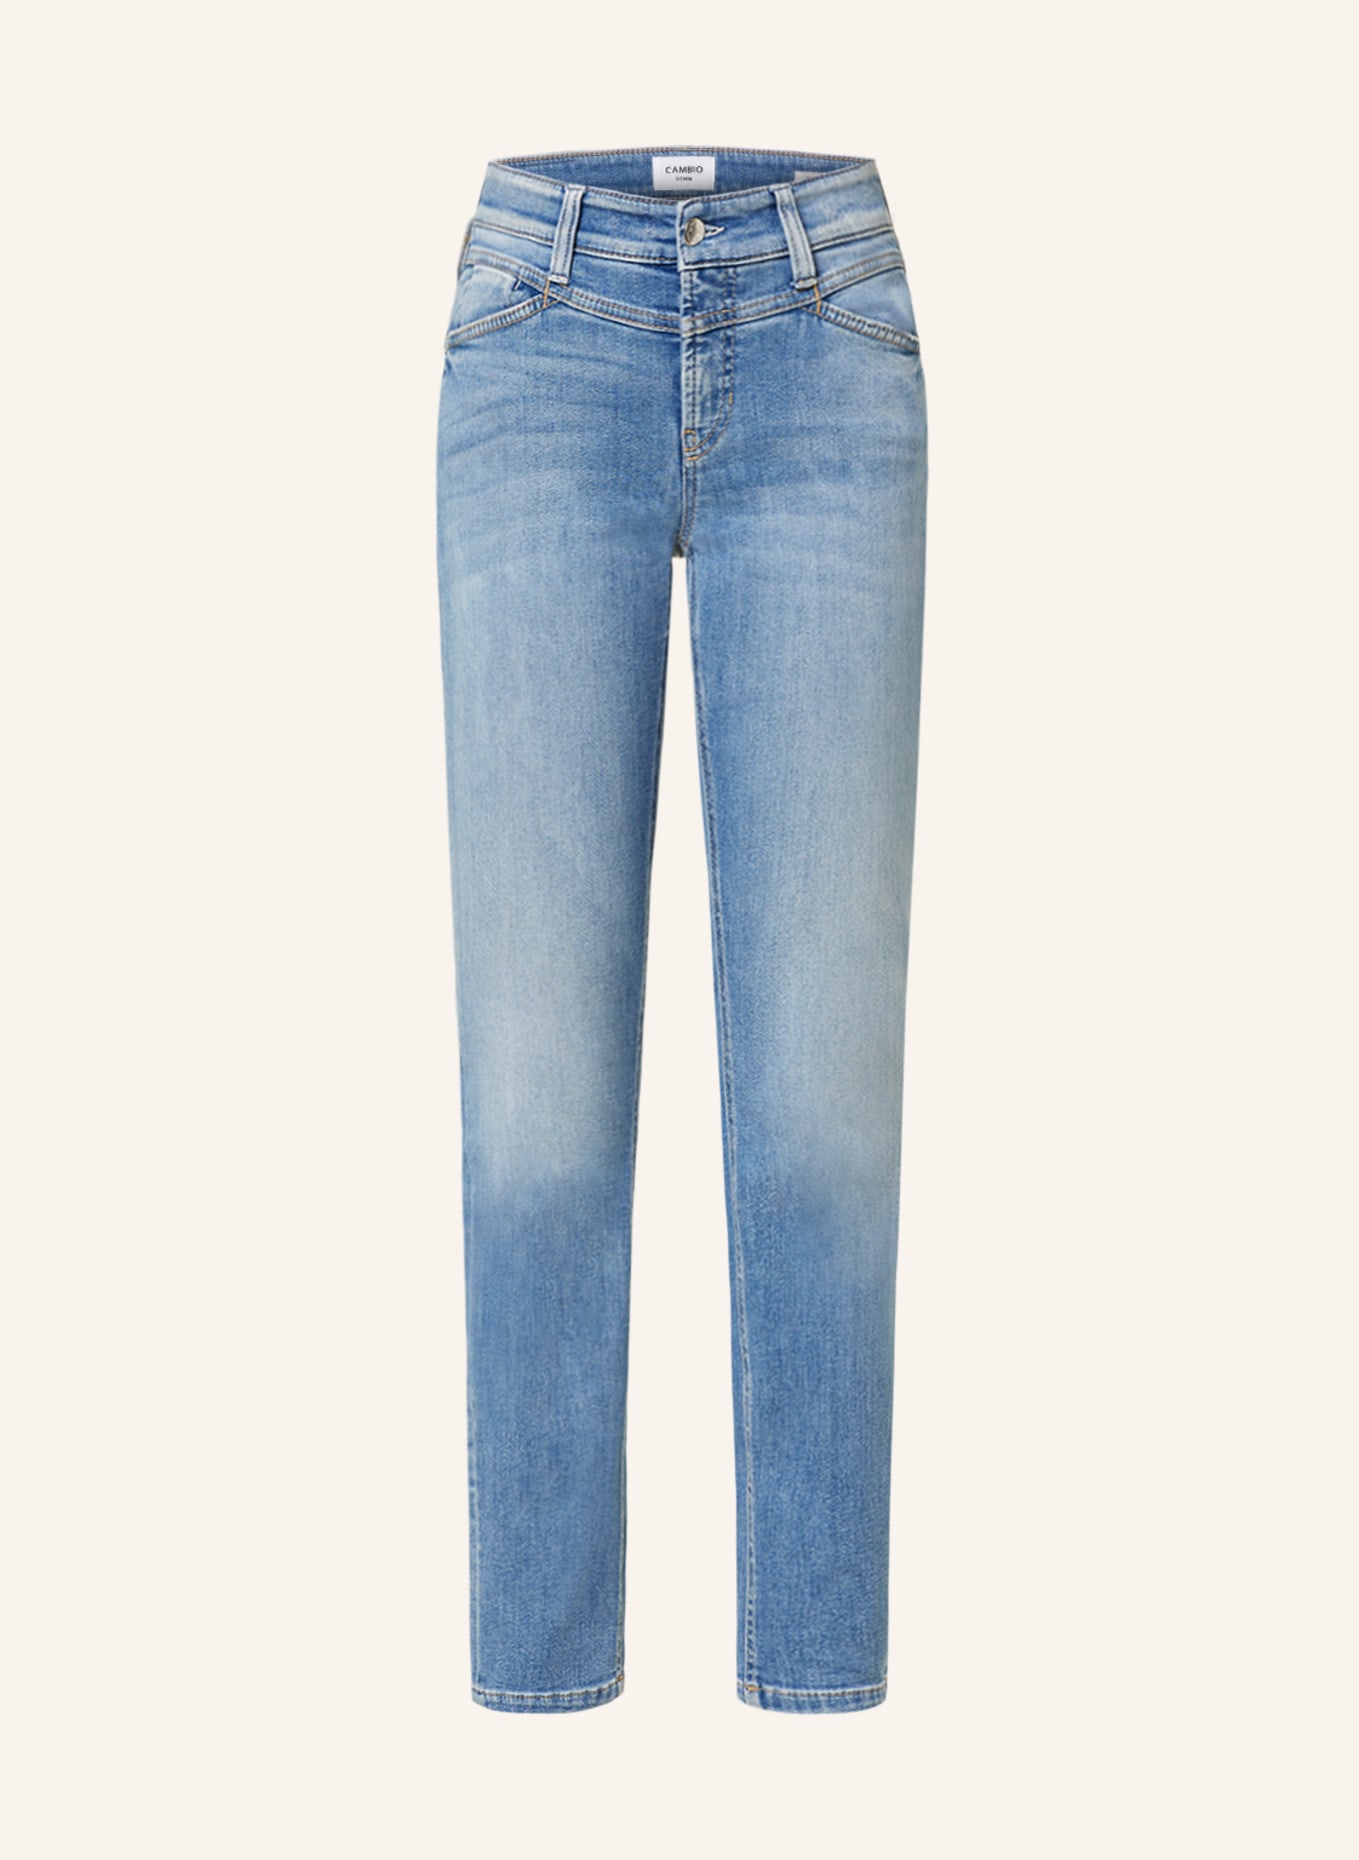 CAMBIO Skinny jeans PARLA, Color: 5215 medium contrast used (Image 1)